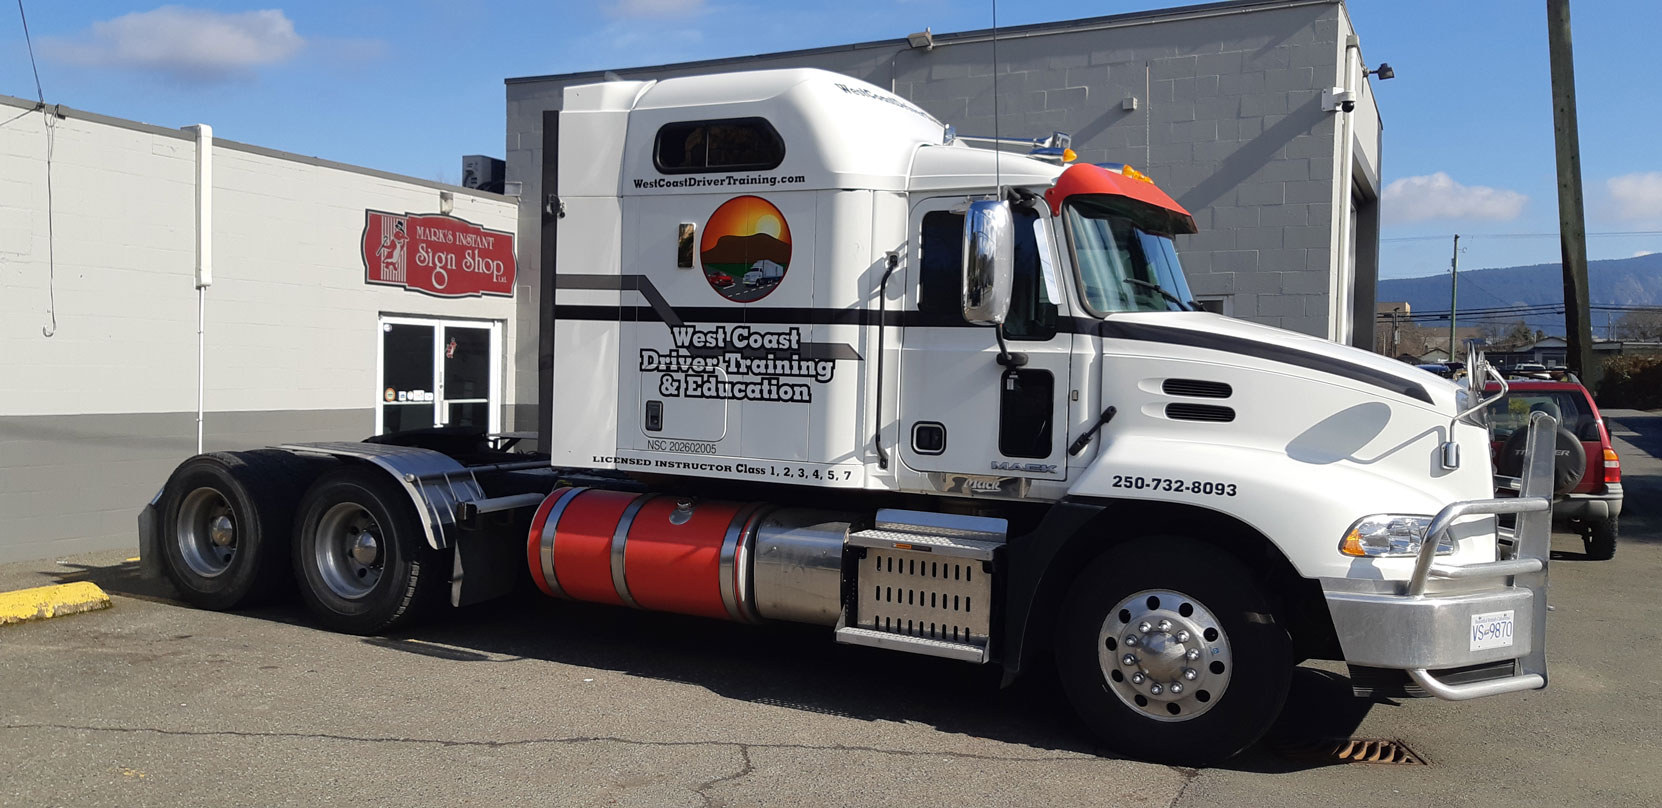 Our 2016 Mack Pinnacle at Mark's Instant Sign Shop after having our corporate decals applied, February 2024 [photo: West Coast Driver Training]